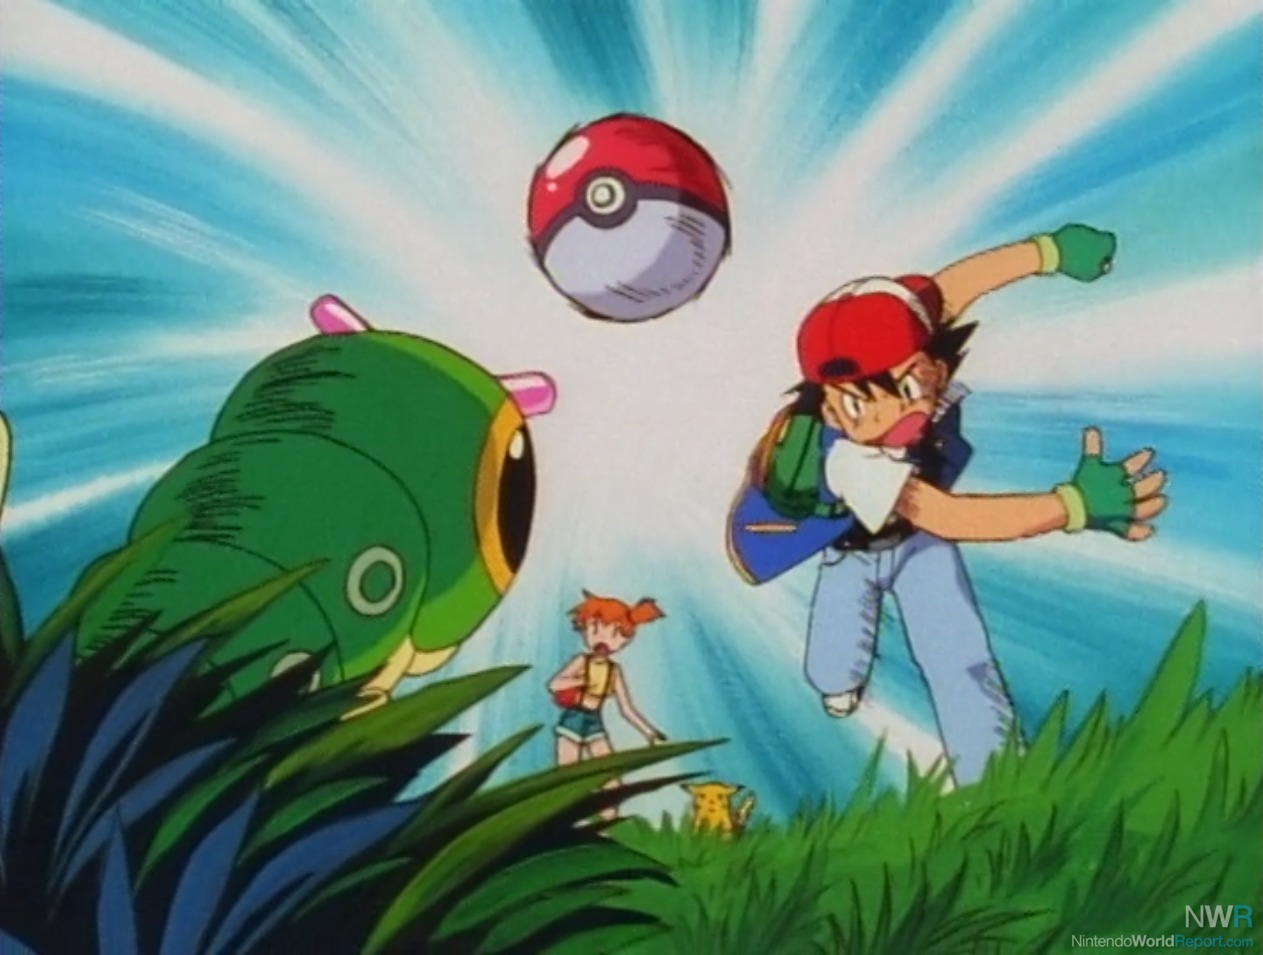 Two stories of ash attempting to catch Pokémon